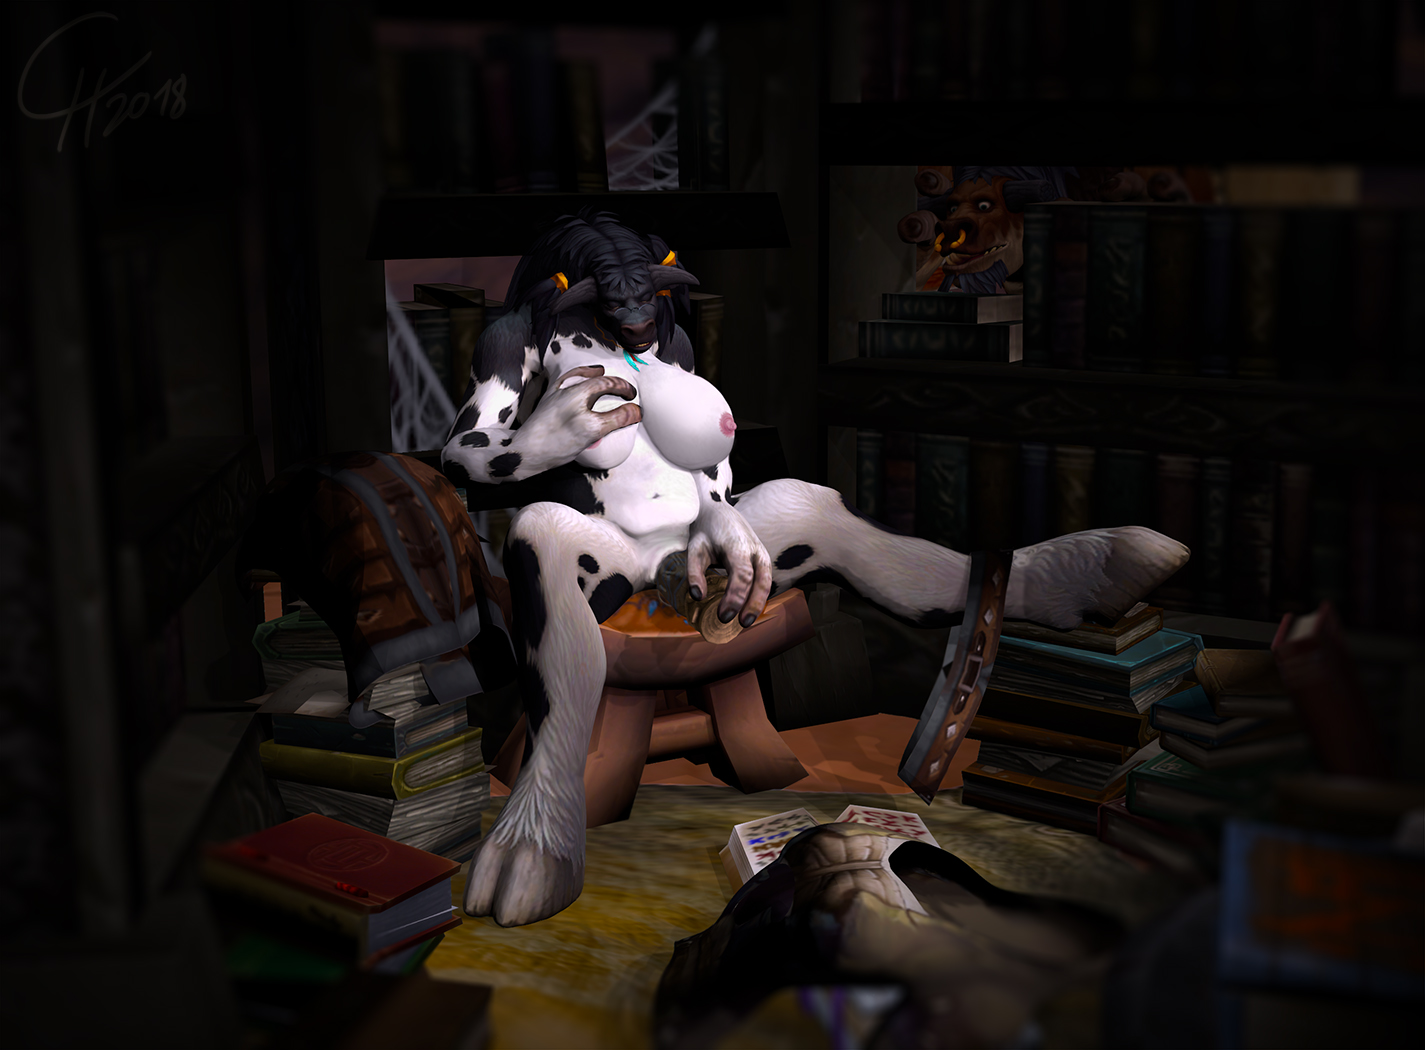 Daydreaming Librarian [Tauren/Solo/BBW]
2018 Free Commission #5
Nahimana doesn't mind working late in the library.
She's content with the silence and being alone surrounded
by books and scrolls. It gives her much needed "self time"
for her to spend reading books.
[b][url=http://bakaras.com/murlocish/albums/userpics/10001/FreeComm05Nahimana-18XL.jpg]===XL-Size Edit===?[/url][/b]
Keywords: Tauren;Solo;BBW;OC;Nahimana